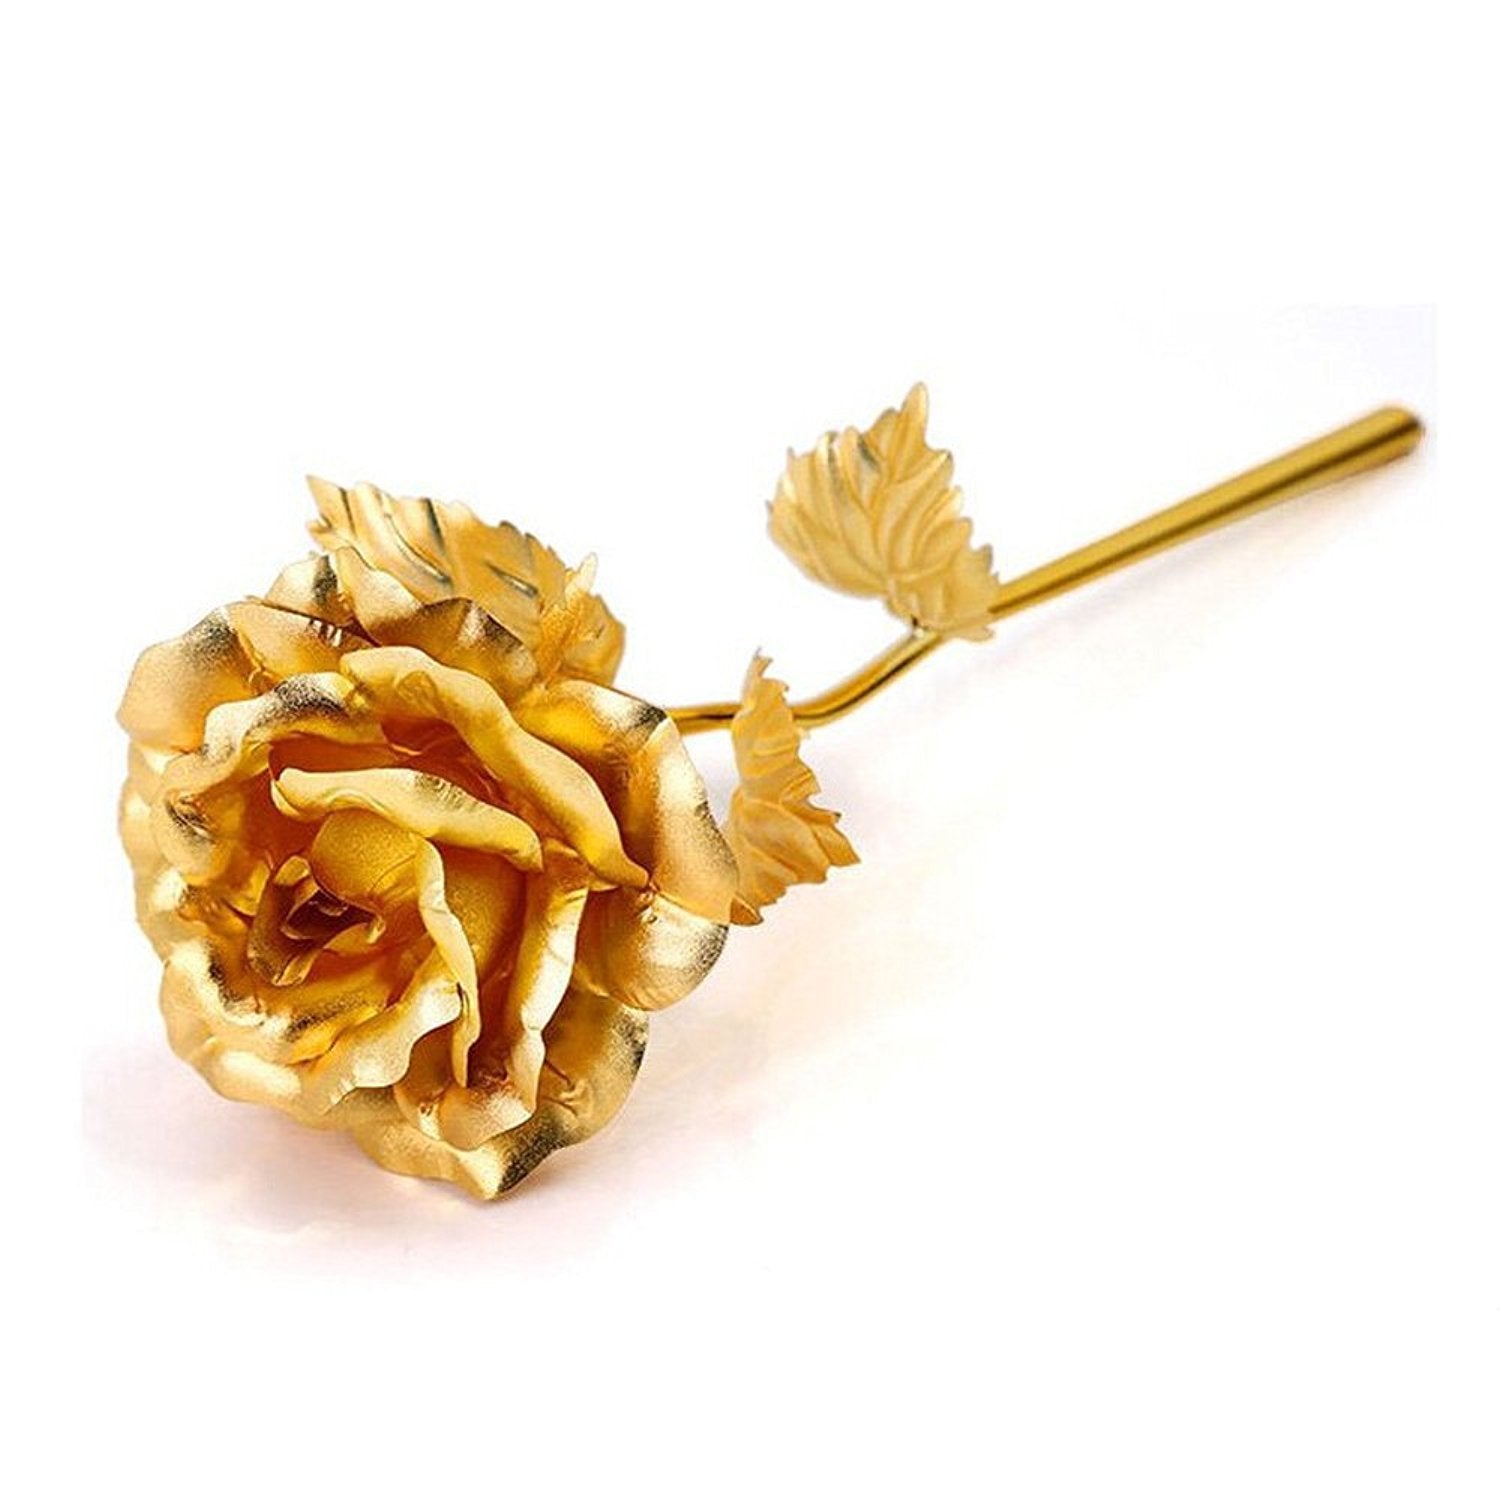 0879 B Golden Rose used in all kinds of places like household, offices, cafe's, etc. for decorating and to look good purposes and all. DeoDap